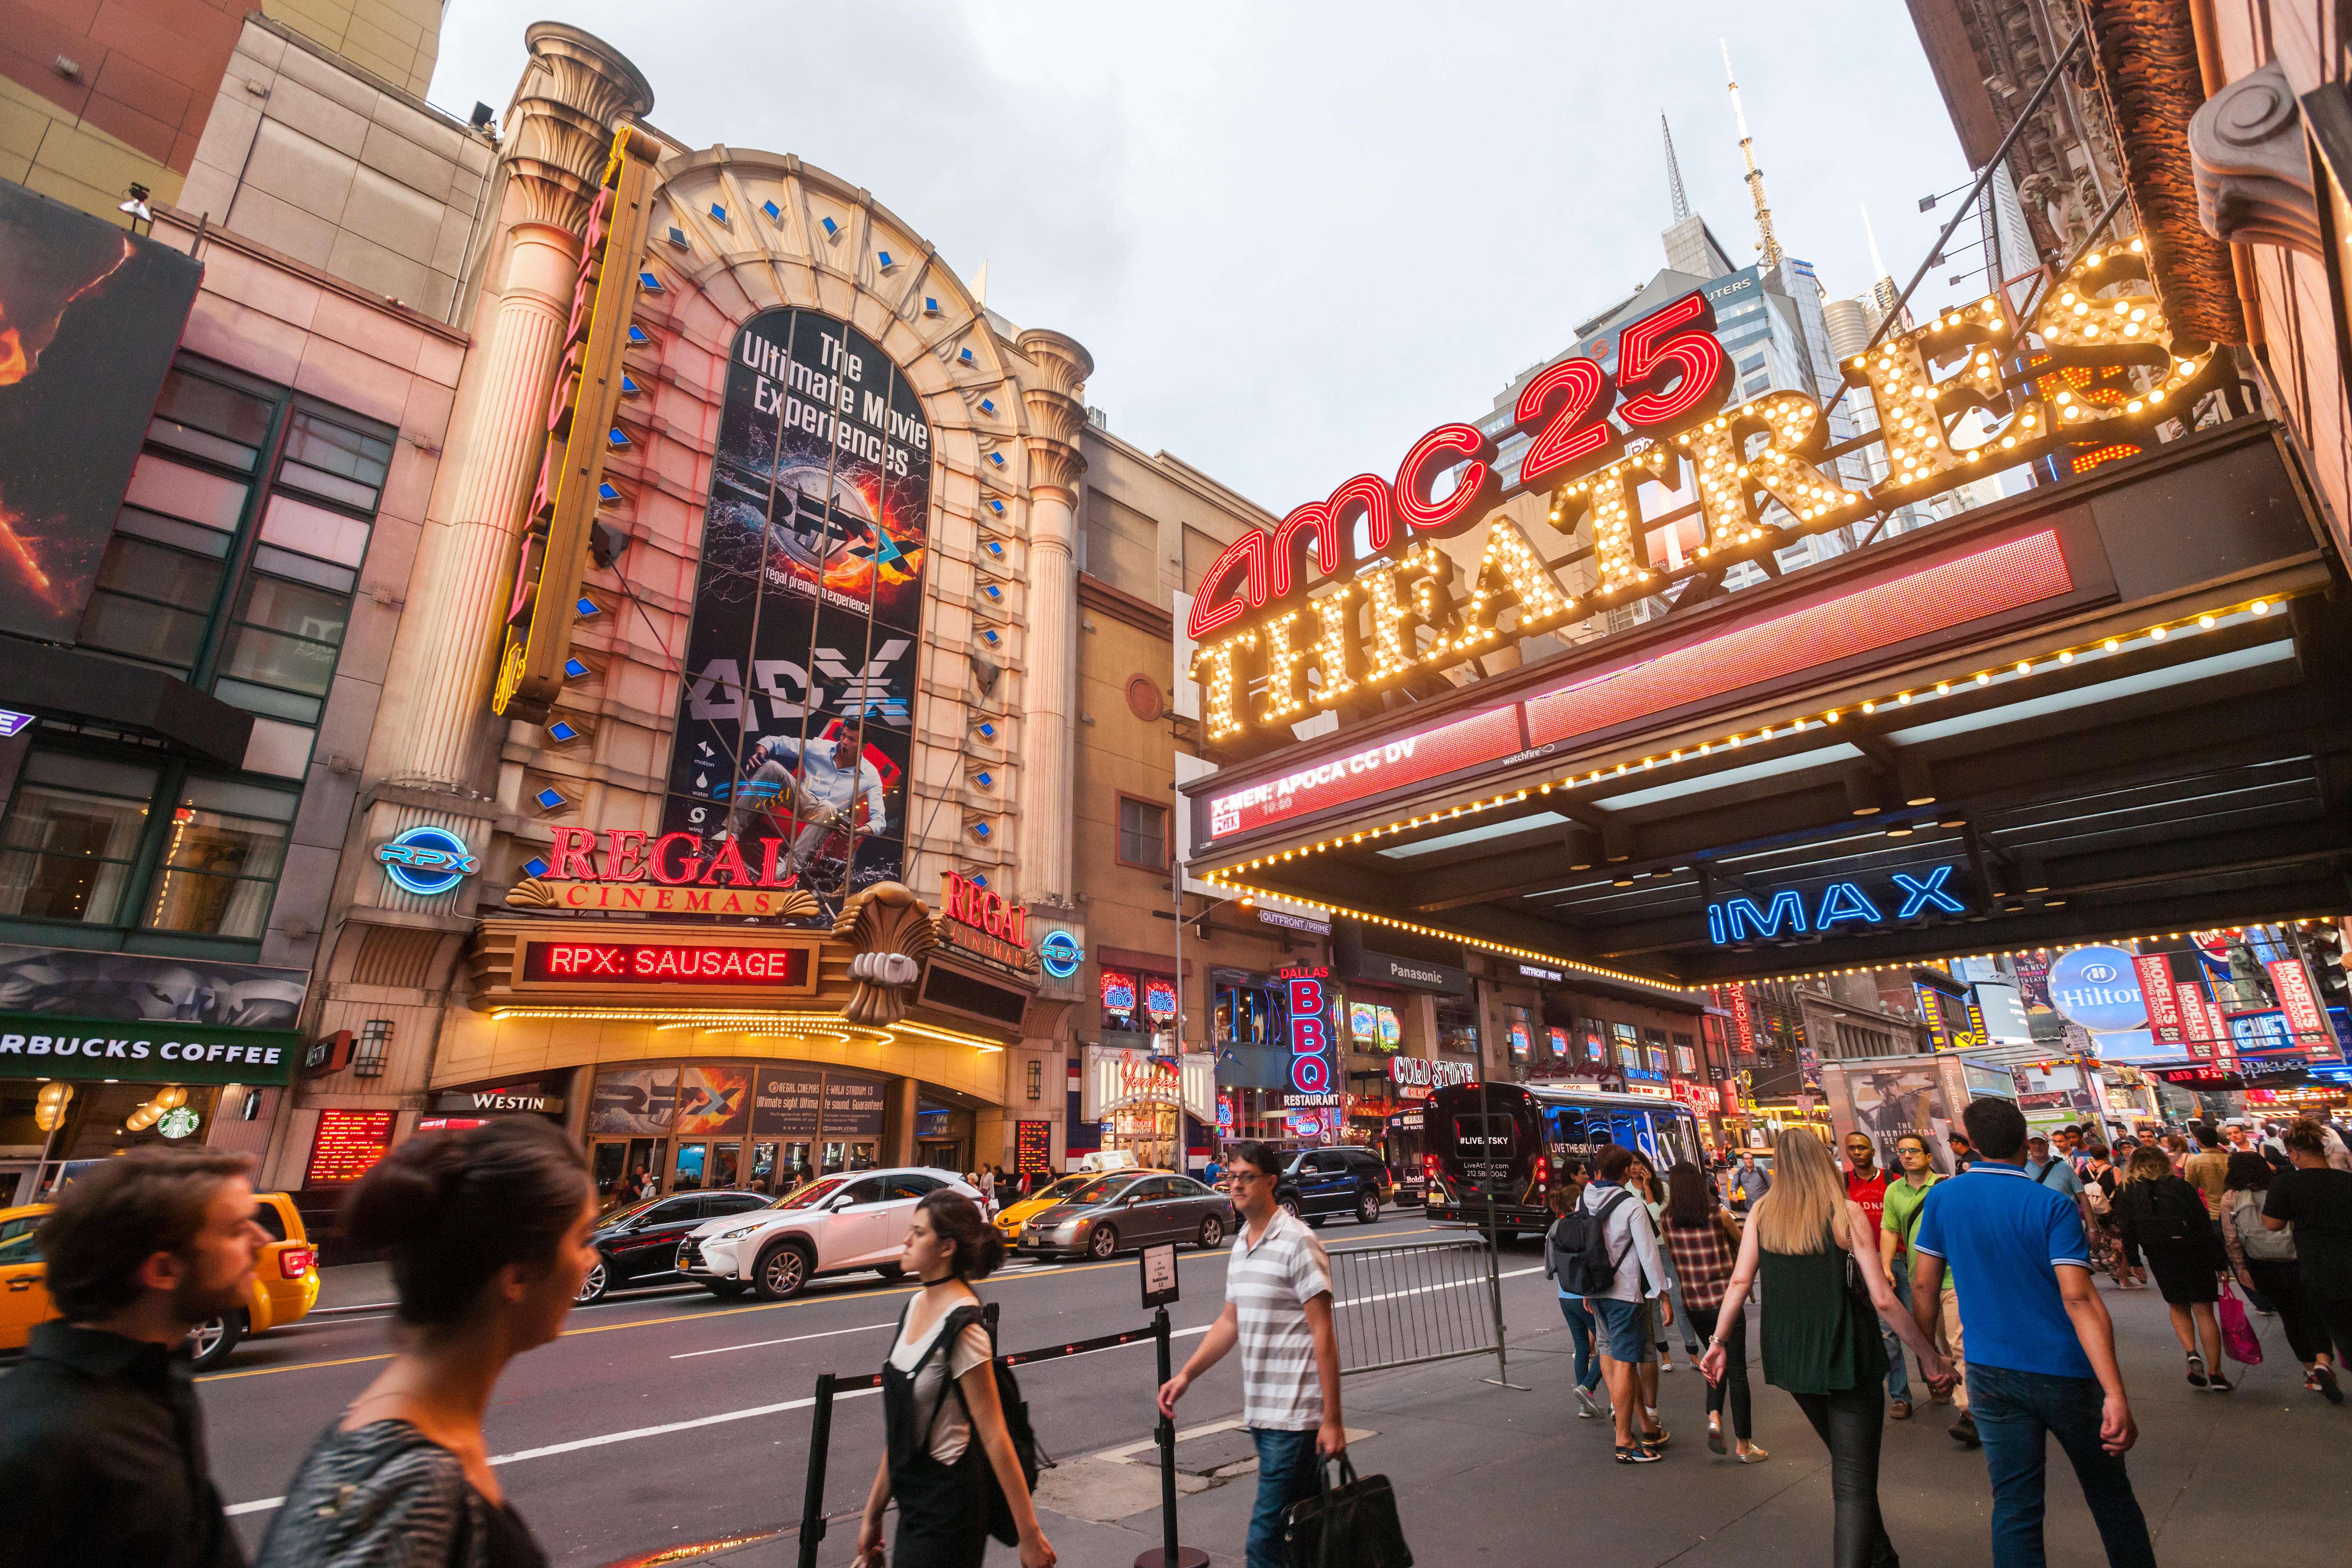 The AMC 25 Theatres and Regal Cinemas in Times Square, in New York. Picture: Alamy